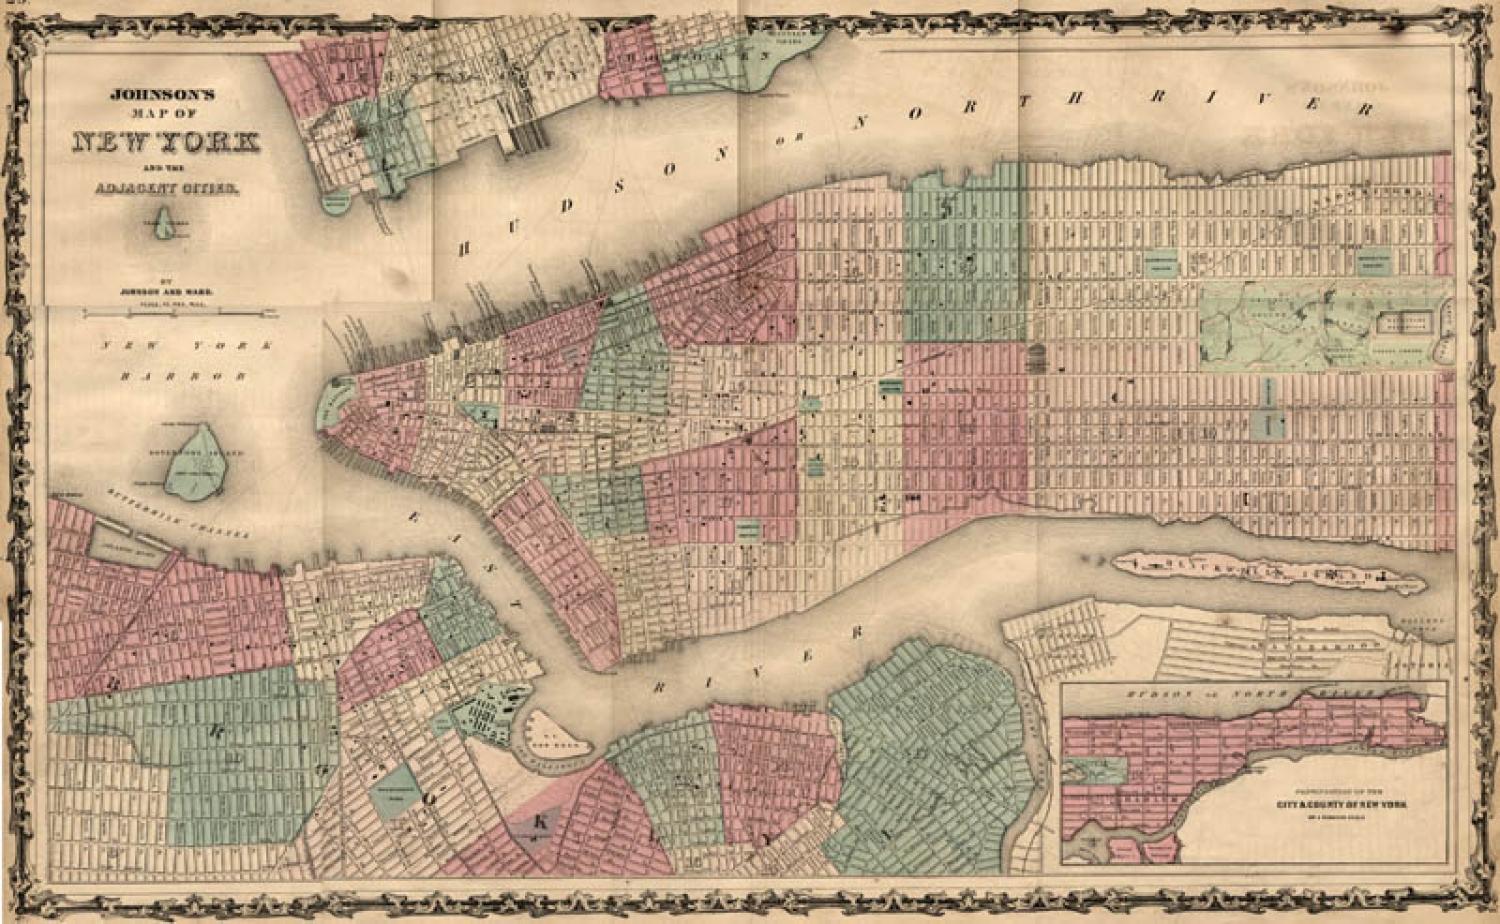 SOLD New York city and the Adjacent cities